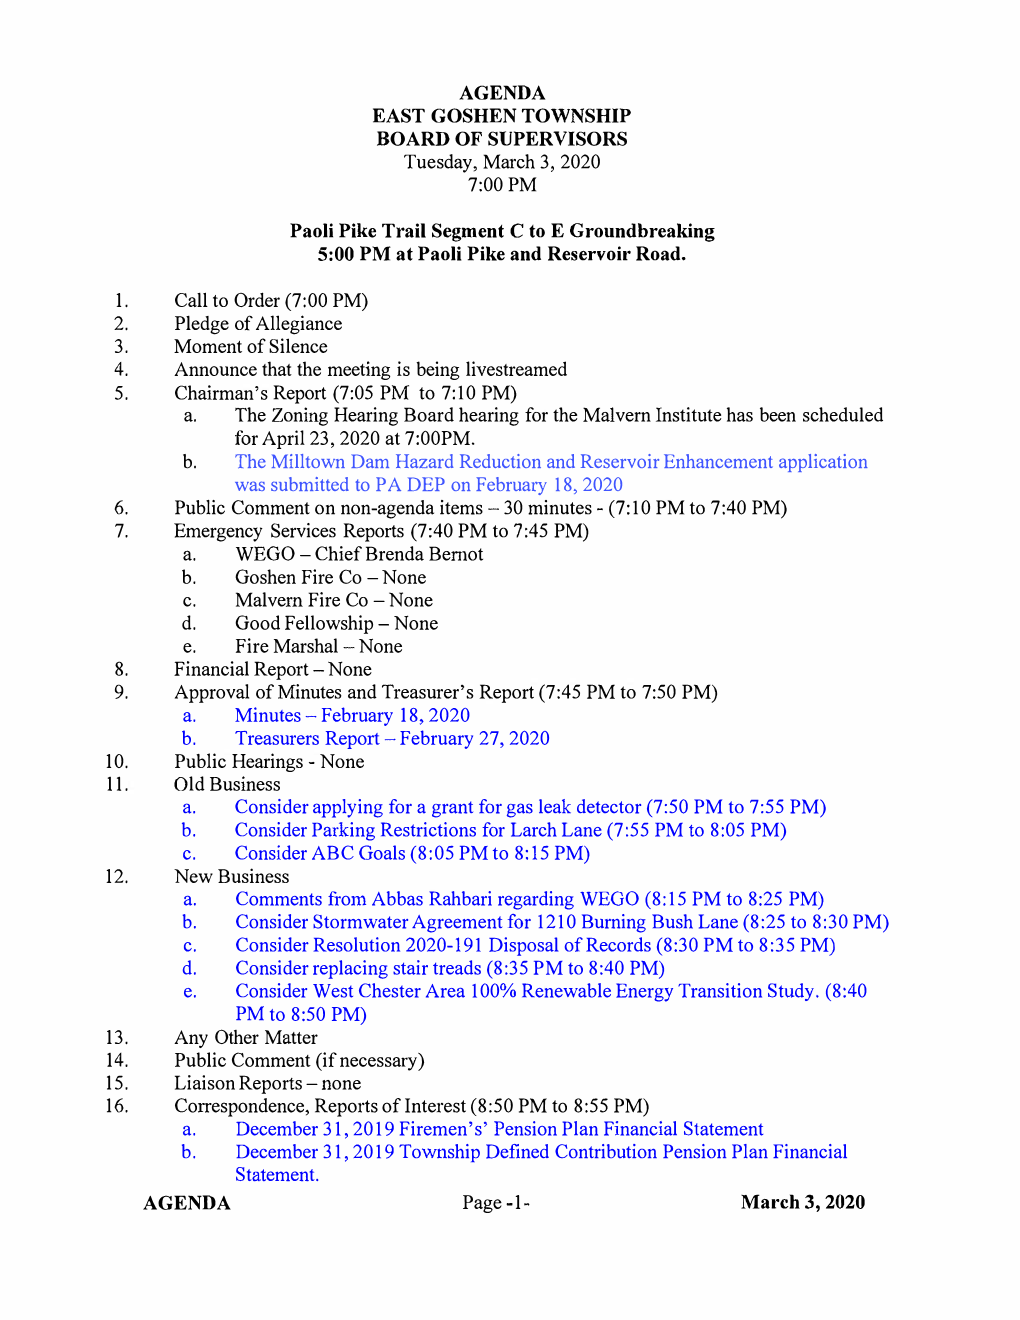 AGENDA EAST GOSHEN TOWNSHIP BOARD of SUPERVISORS Tuesday, March 3, 2020 7:00 PM